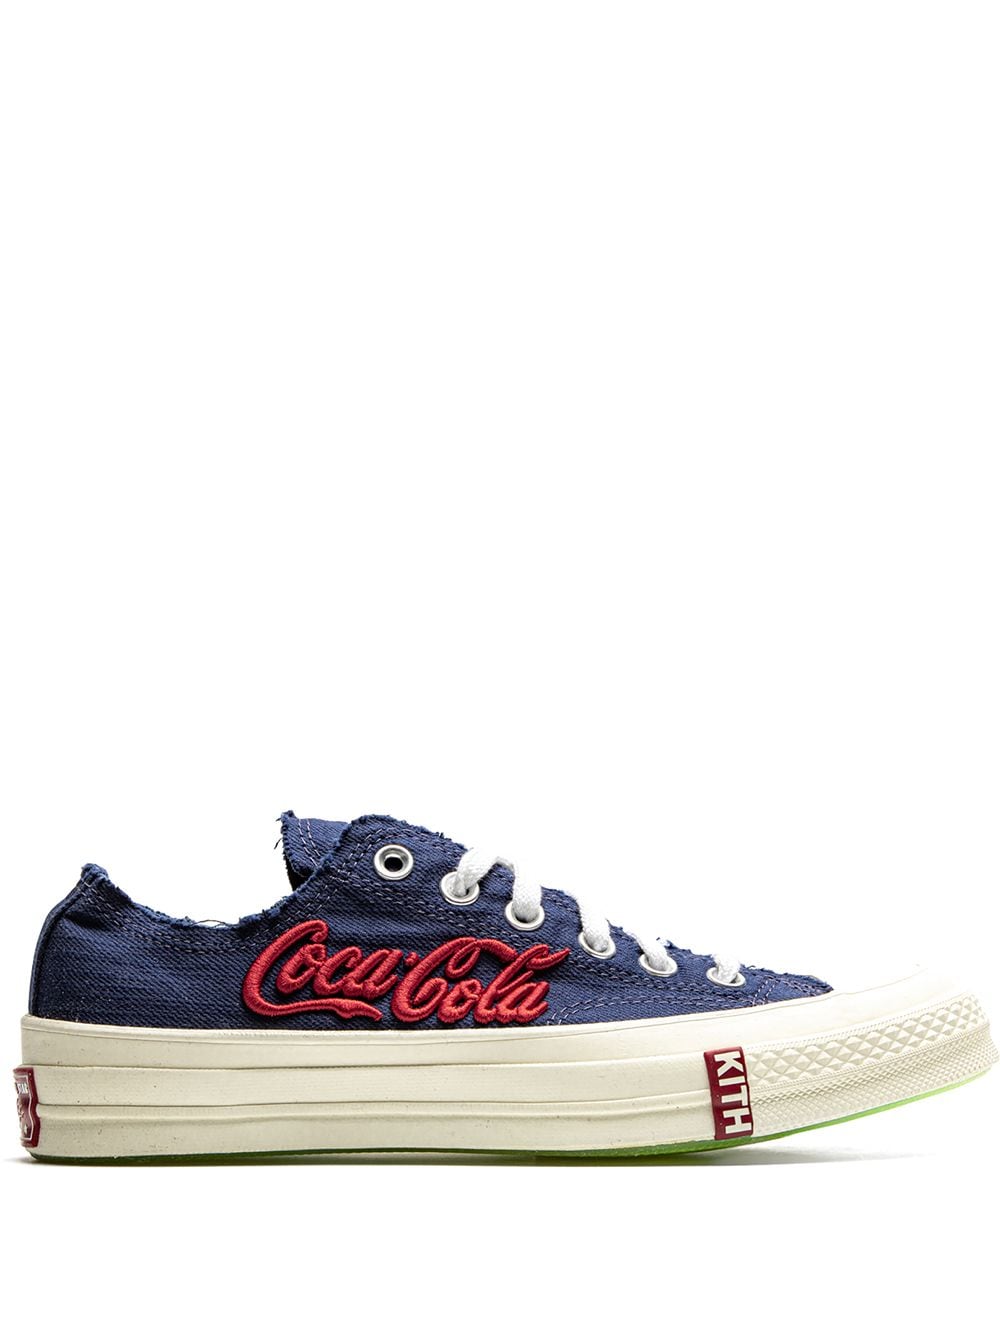 CONVERSE X KITH X COCA-COLA CHUCK 70 LOW-TOP SNEAKERS